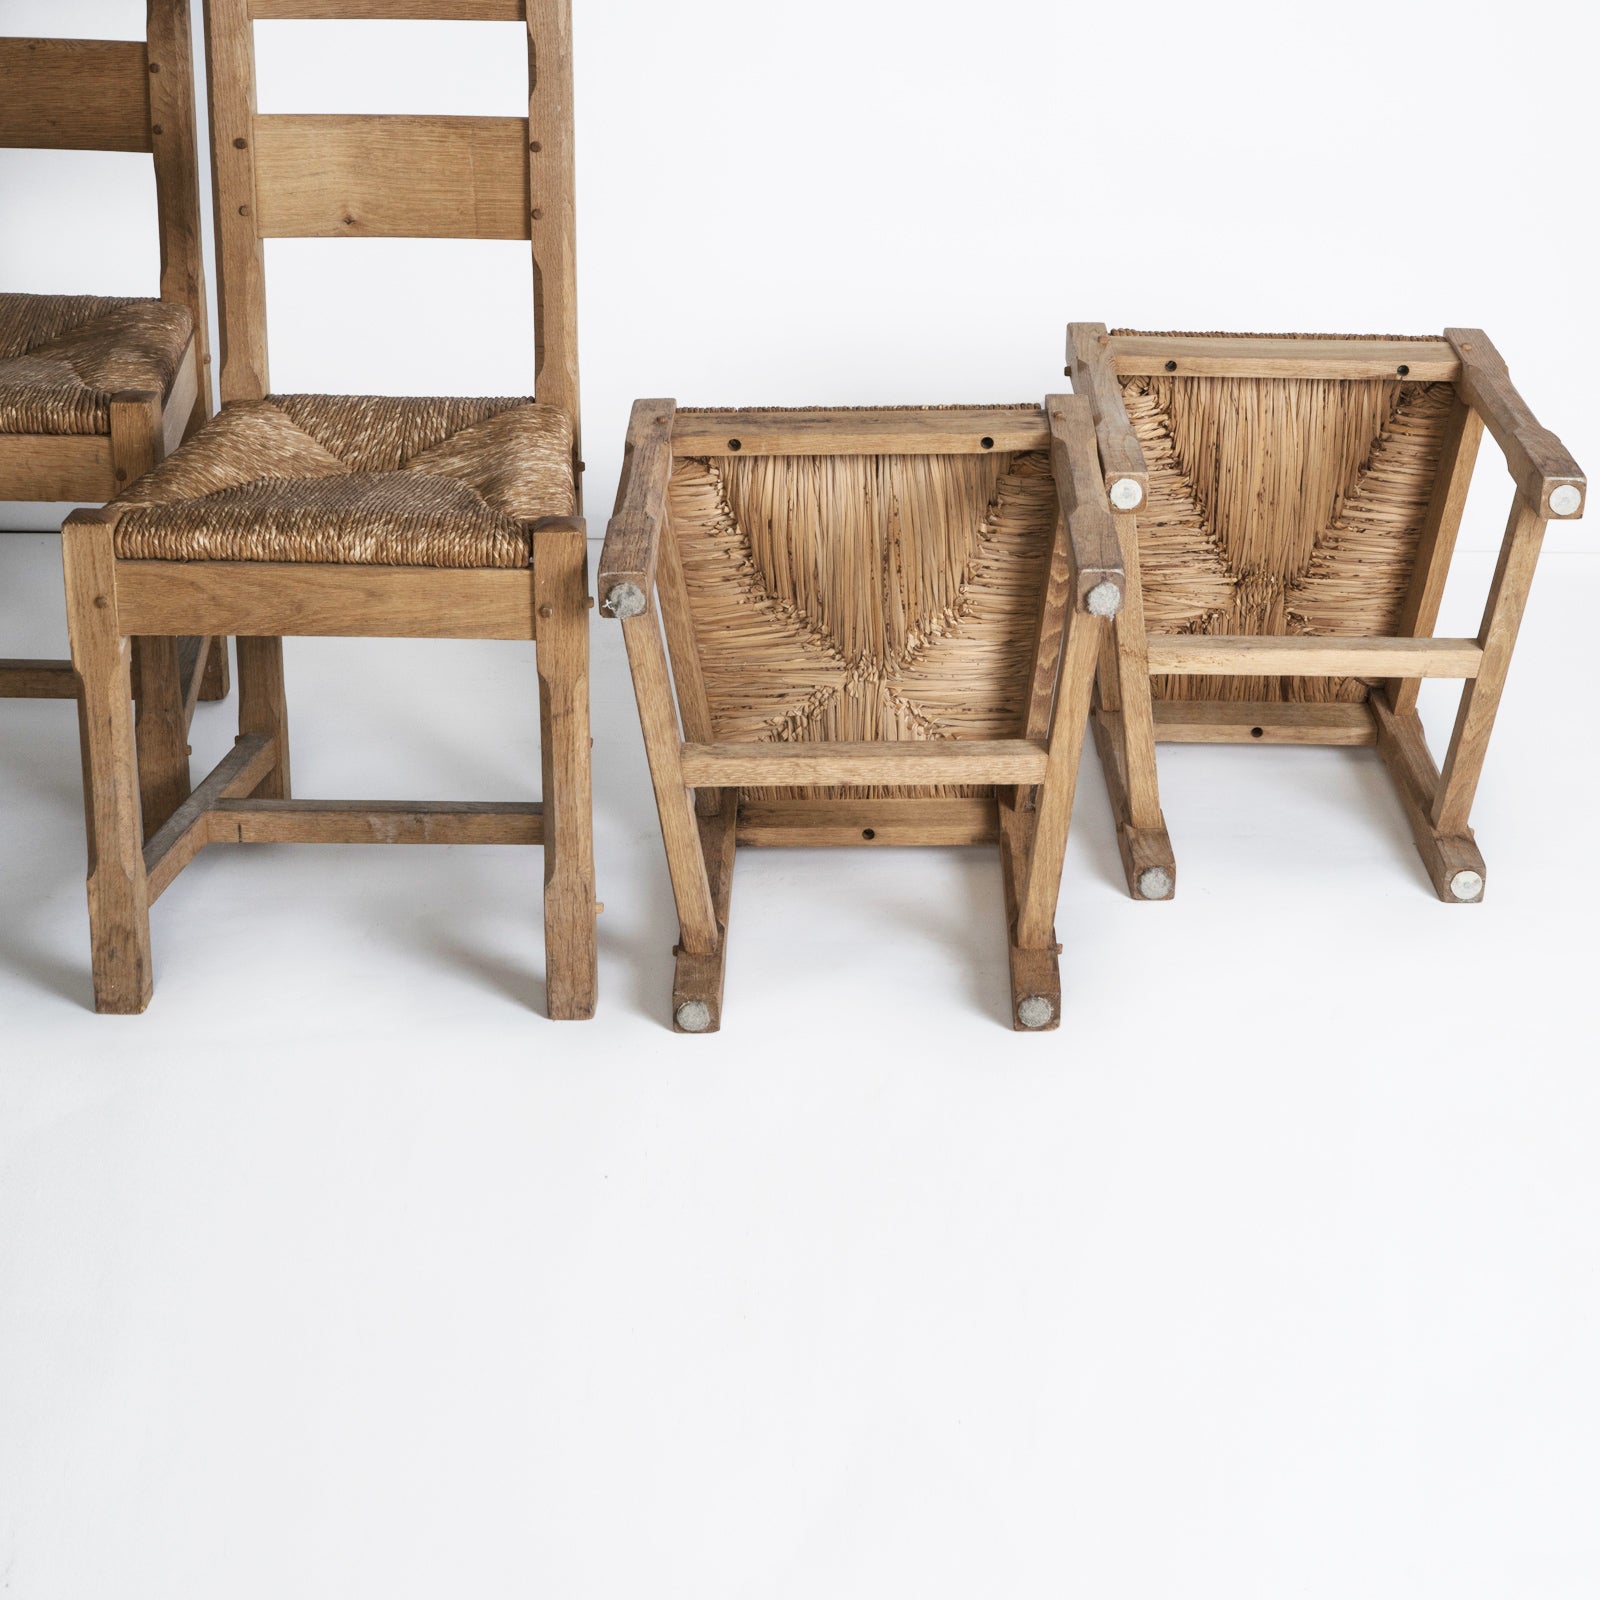 1970s Vintage Wood & Wicker Chairs, Set of 4